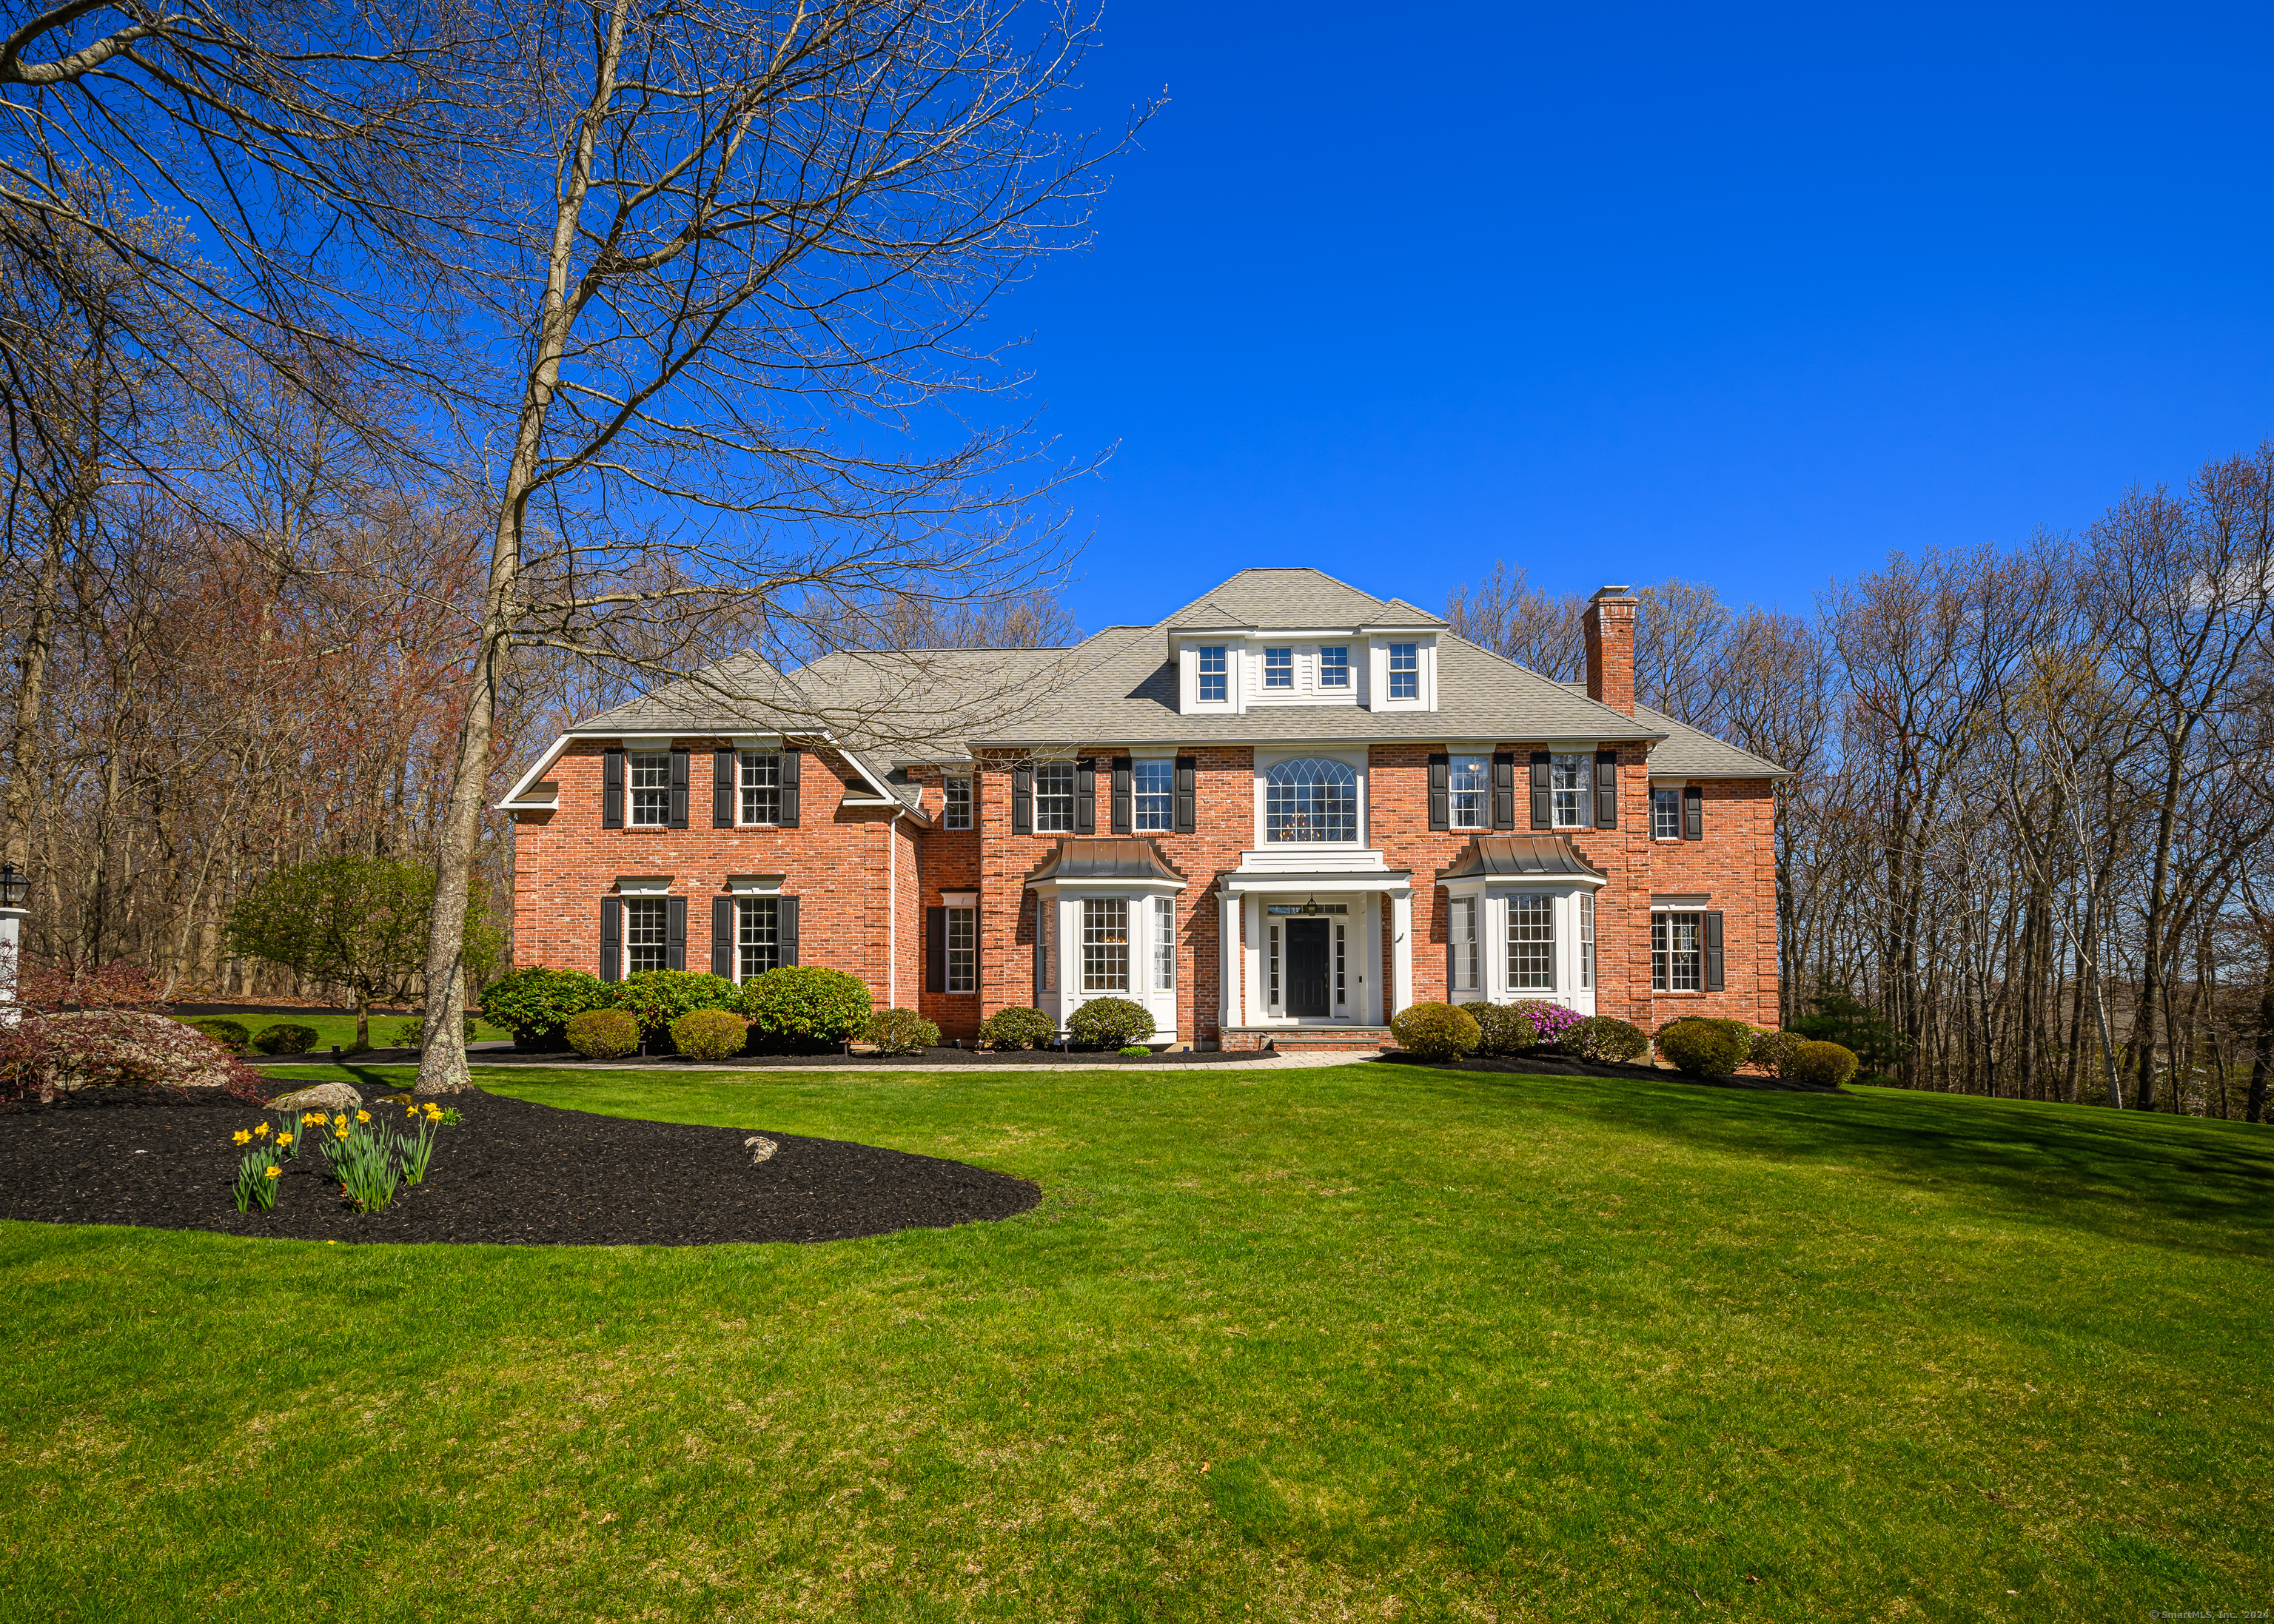 226 Kingswood Drive, Avon, Connecticut - 5 Bedrooms  
6 Bathrooms  
10 Rooms - 